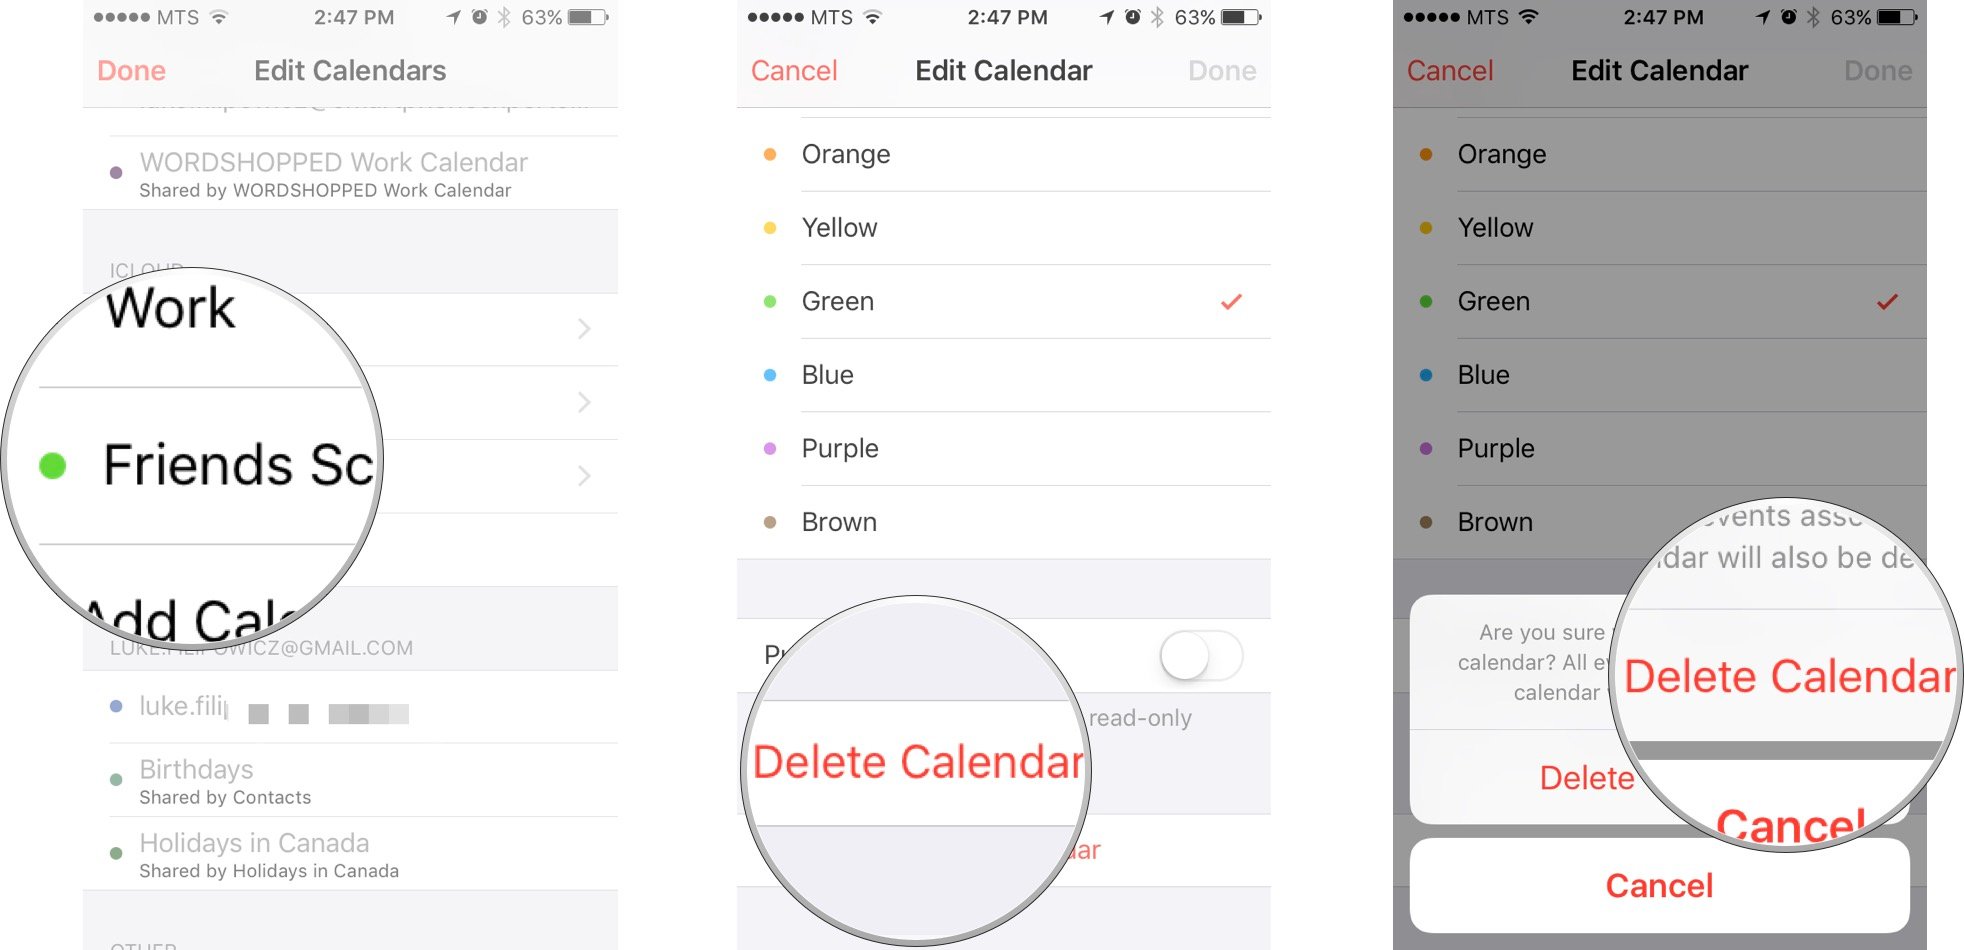 Tap on the calendar you want to delete, Tap on Delete Calendar, and then tap on Delete Calendar again.